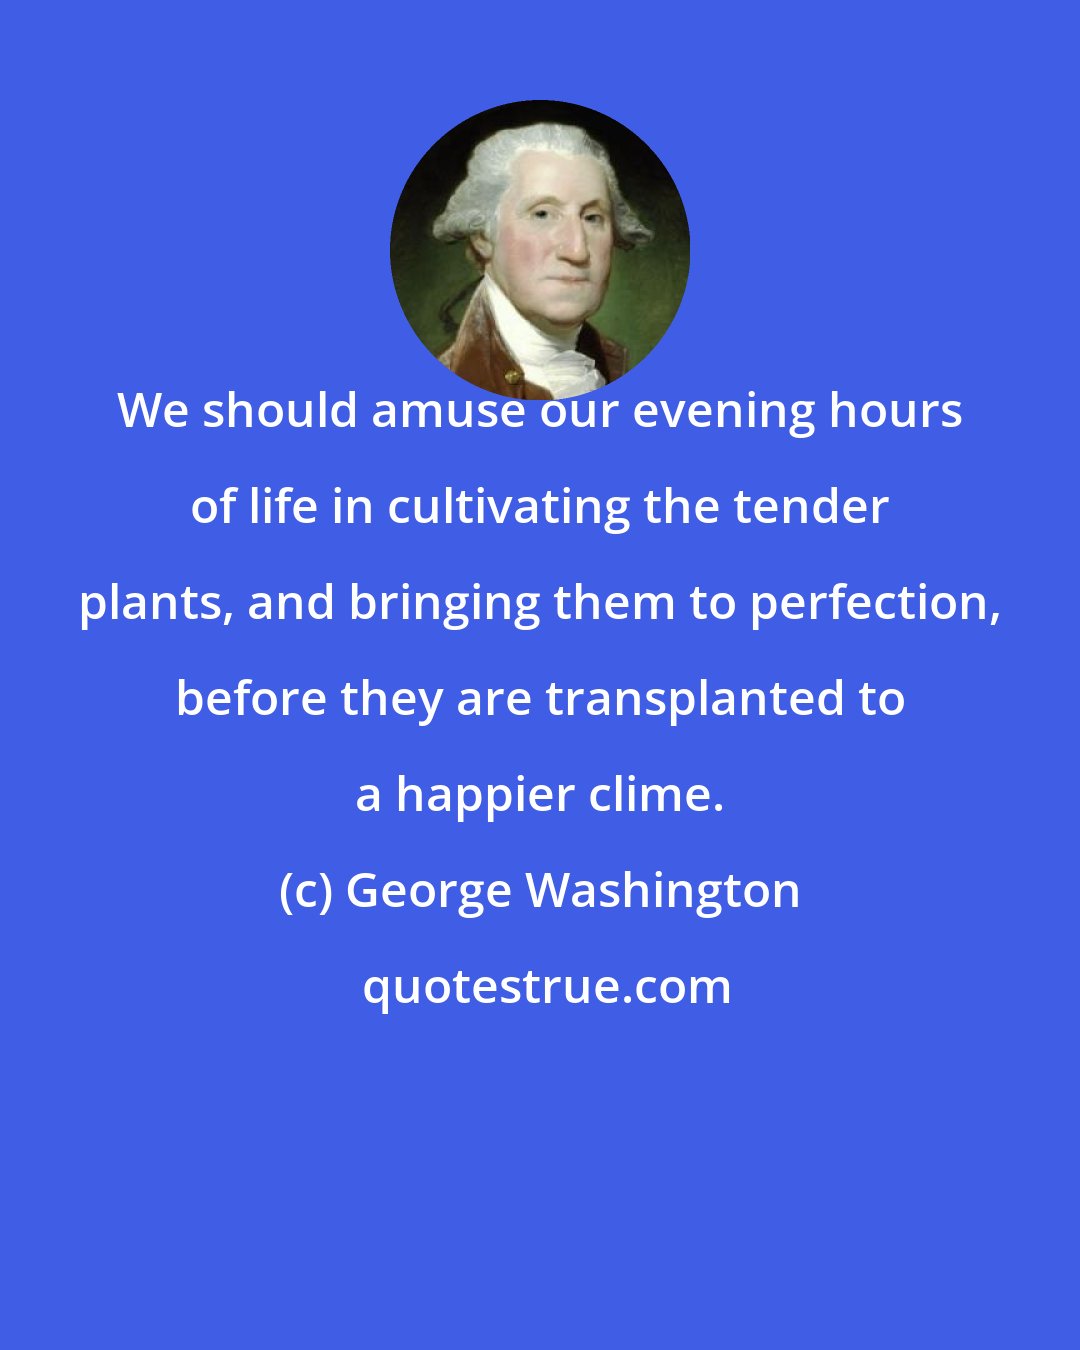 George Washington: We should amuse our evening hours of life in cultivating the tender plants, and bringing them to perfection, before they are transplanted to a happier clime.